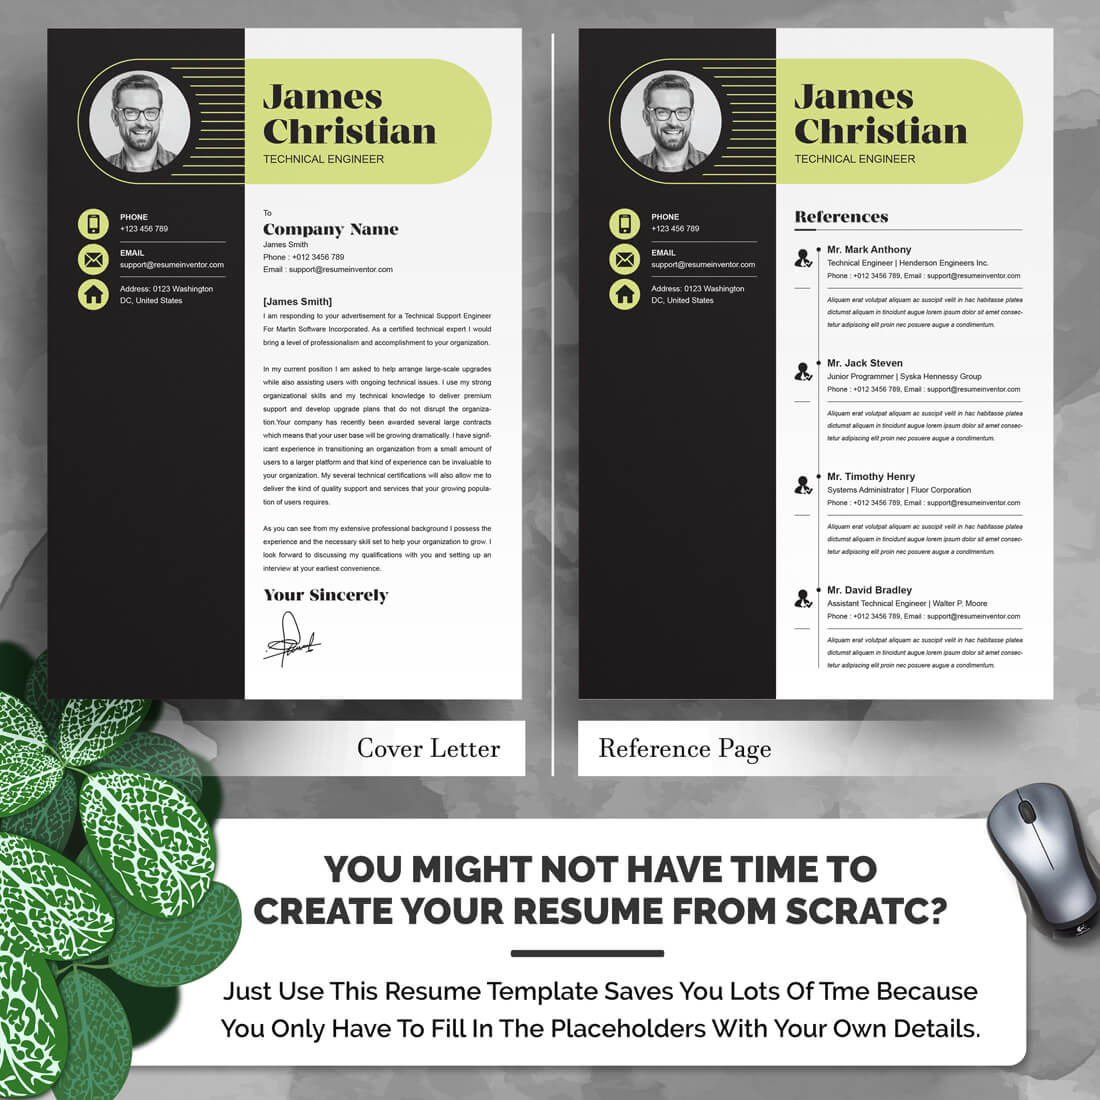 Dark resume template with green elements